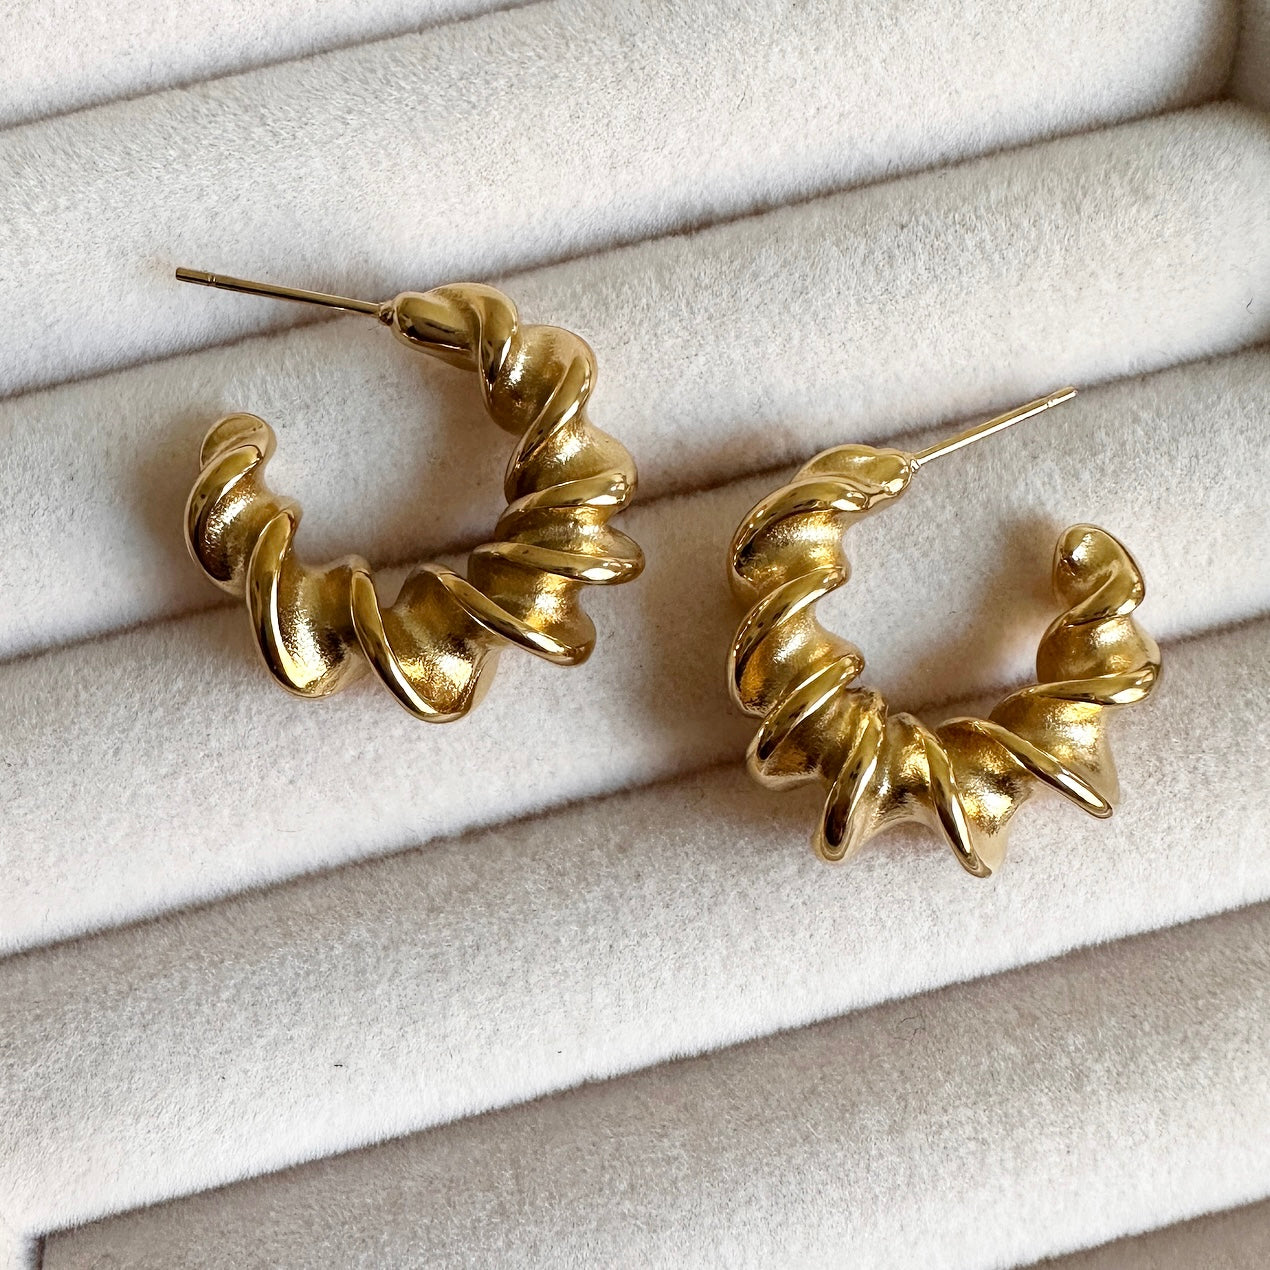 Elevate your look with the Twilly Earrings. Crafted in 18K gold , these timelessly elegant earrings are designed and crafted for day-to-night wear, with classic style guaranteed to remain timelessly stylish. Earring Drop 2.5cm